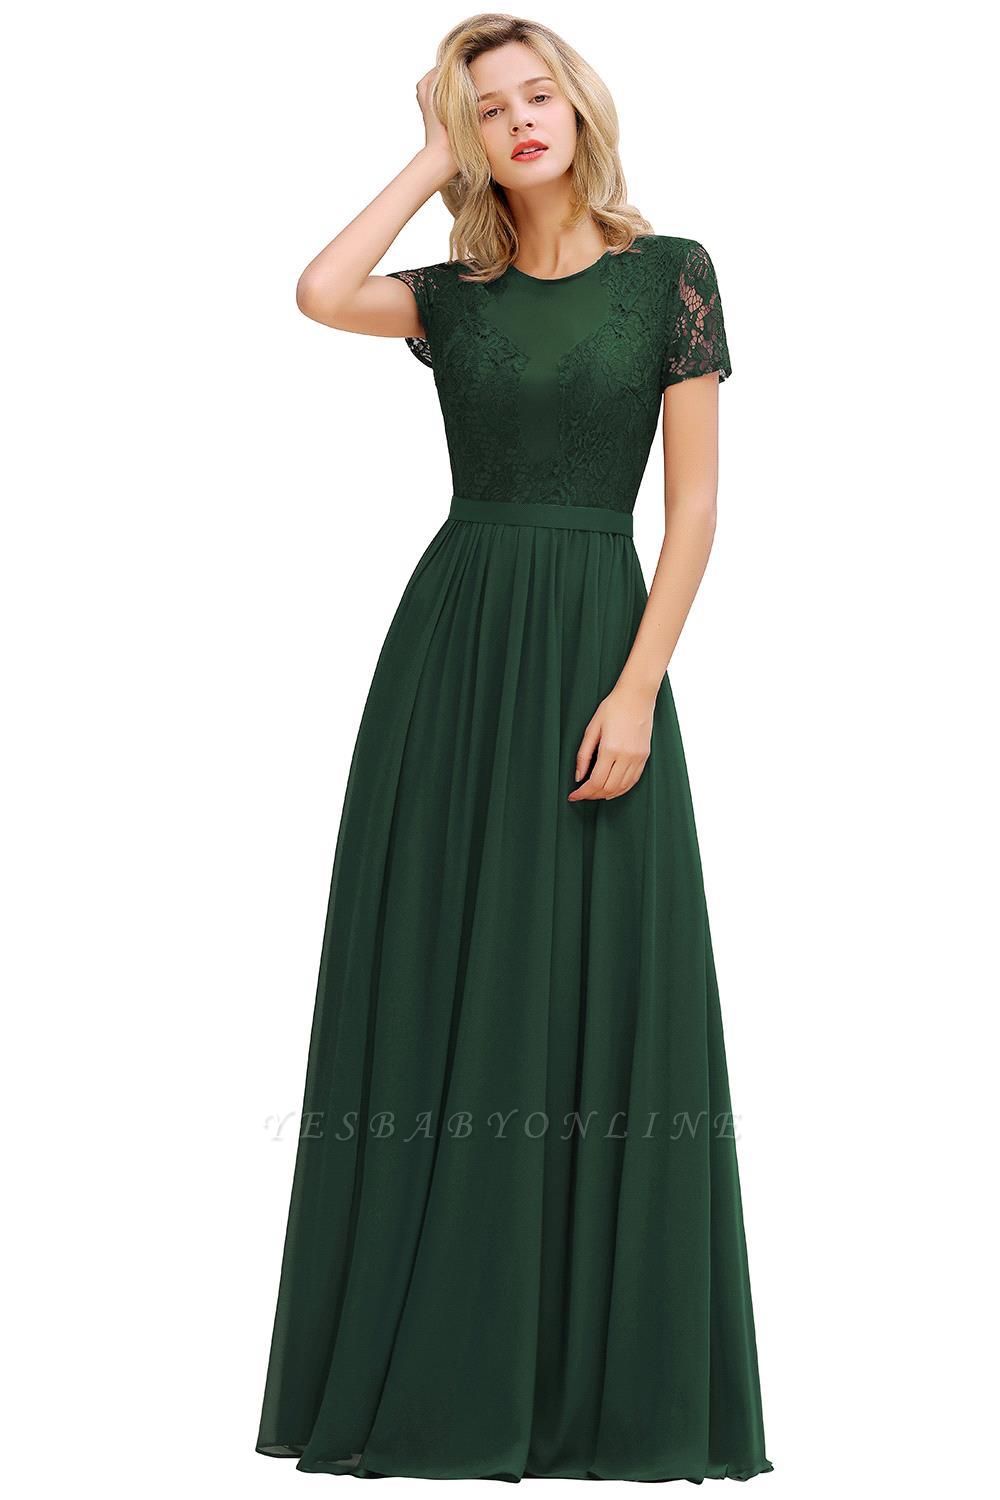 A-line Chiffon Lace Bridesmaid Dress with Short Sleeves